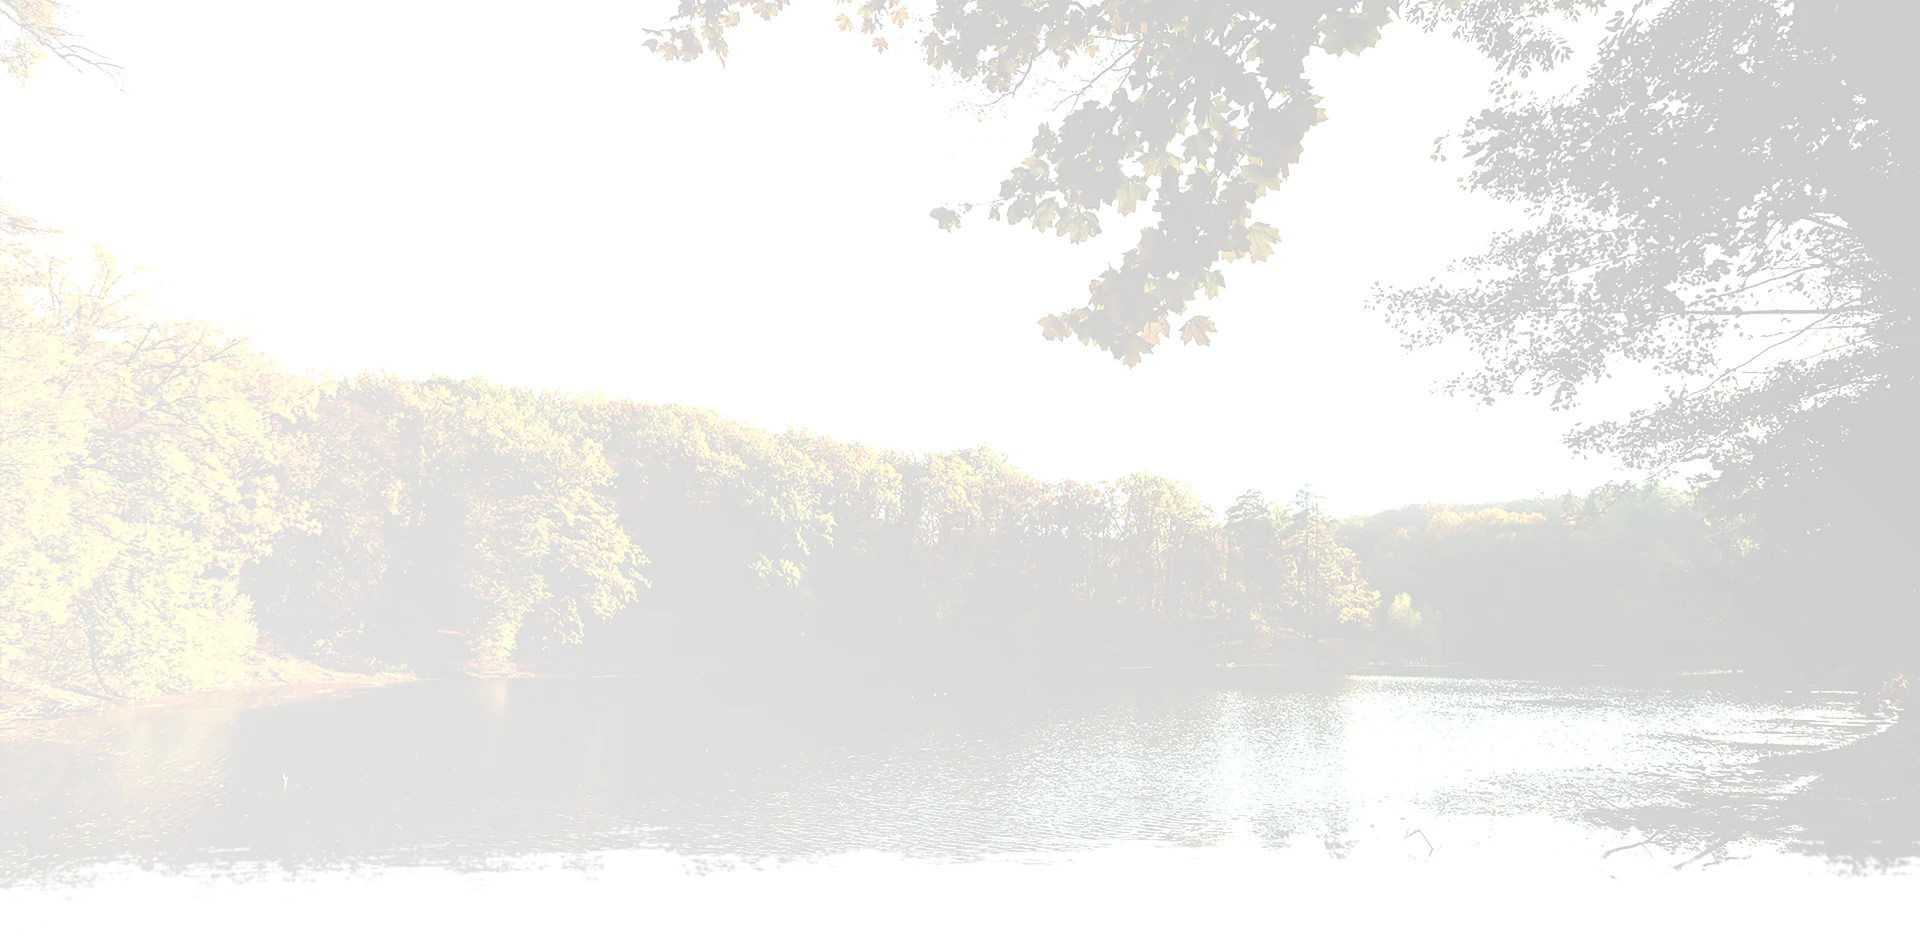 Faded background image of a lake and woods